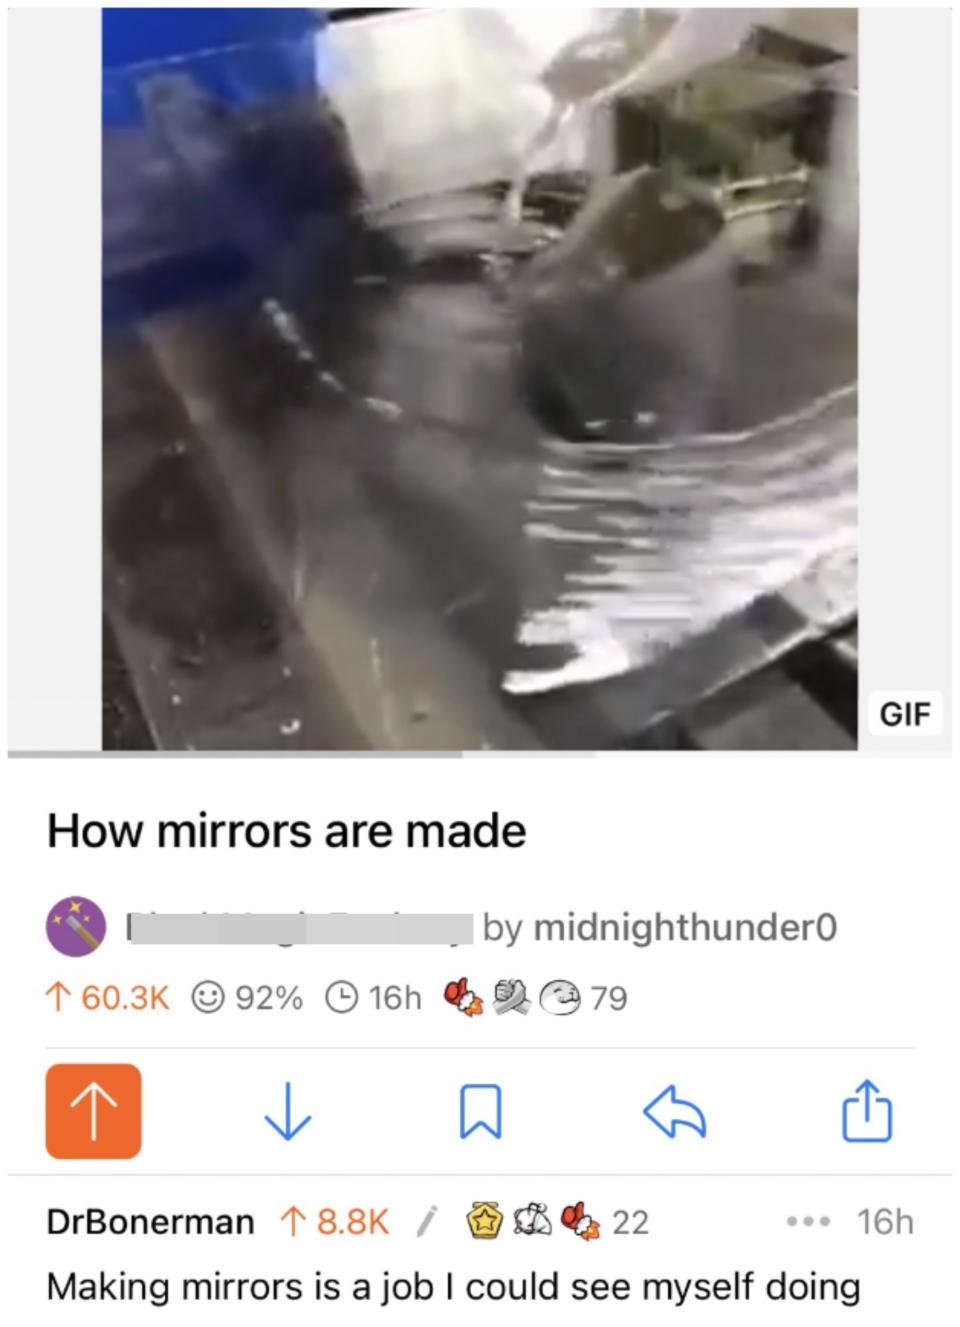 Someone shows how mirrors are made, and someone says that making mirrors is a job I could see myself doing